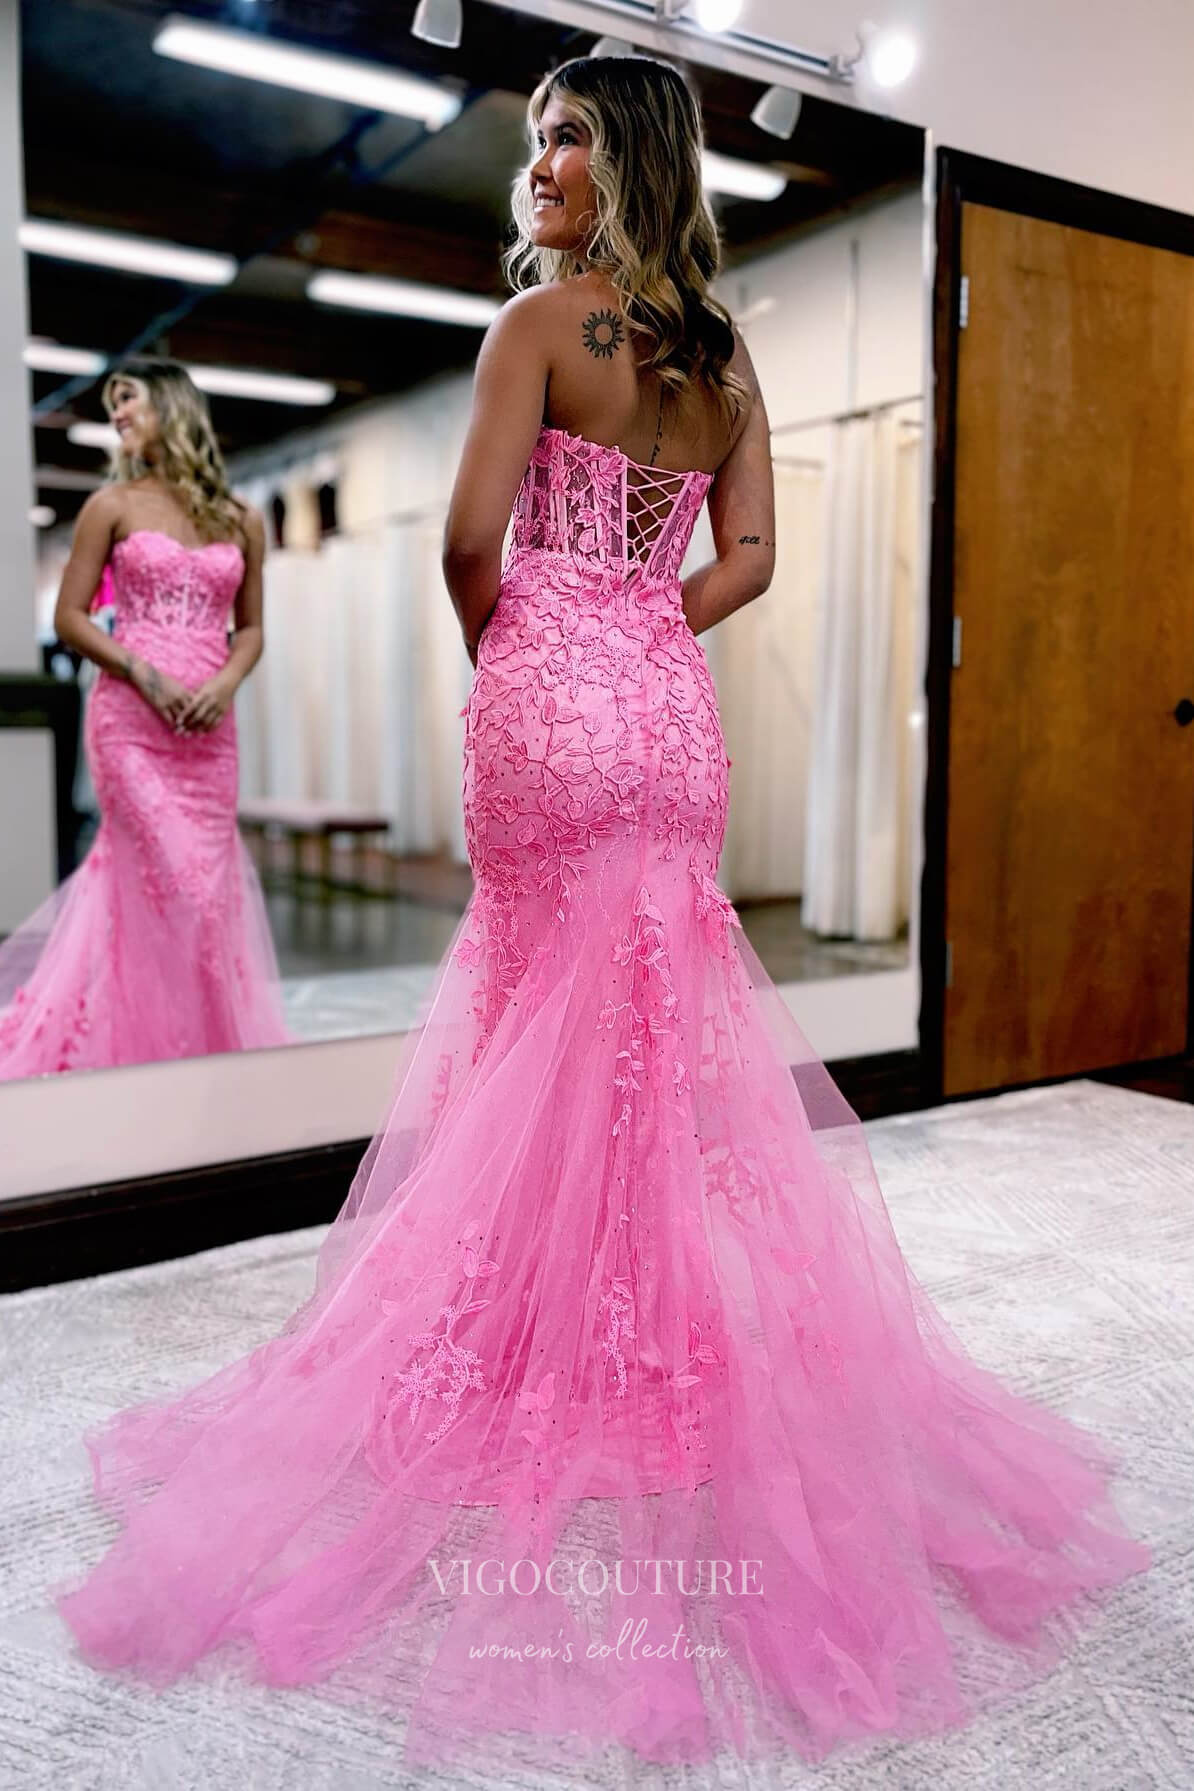 Strapless Lace Applique Prom Dresses with Corset Back Mermaid